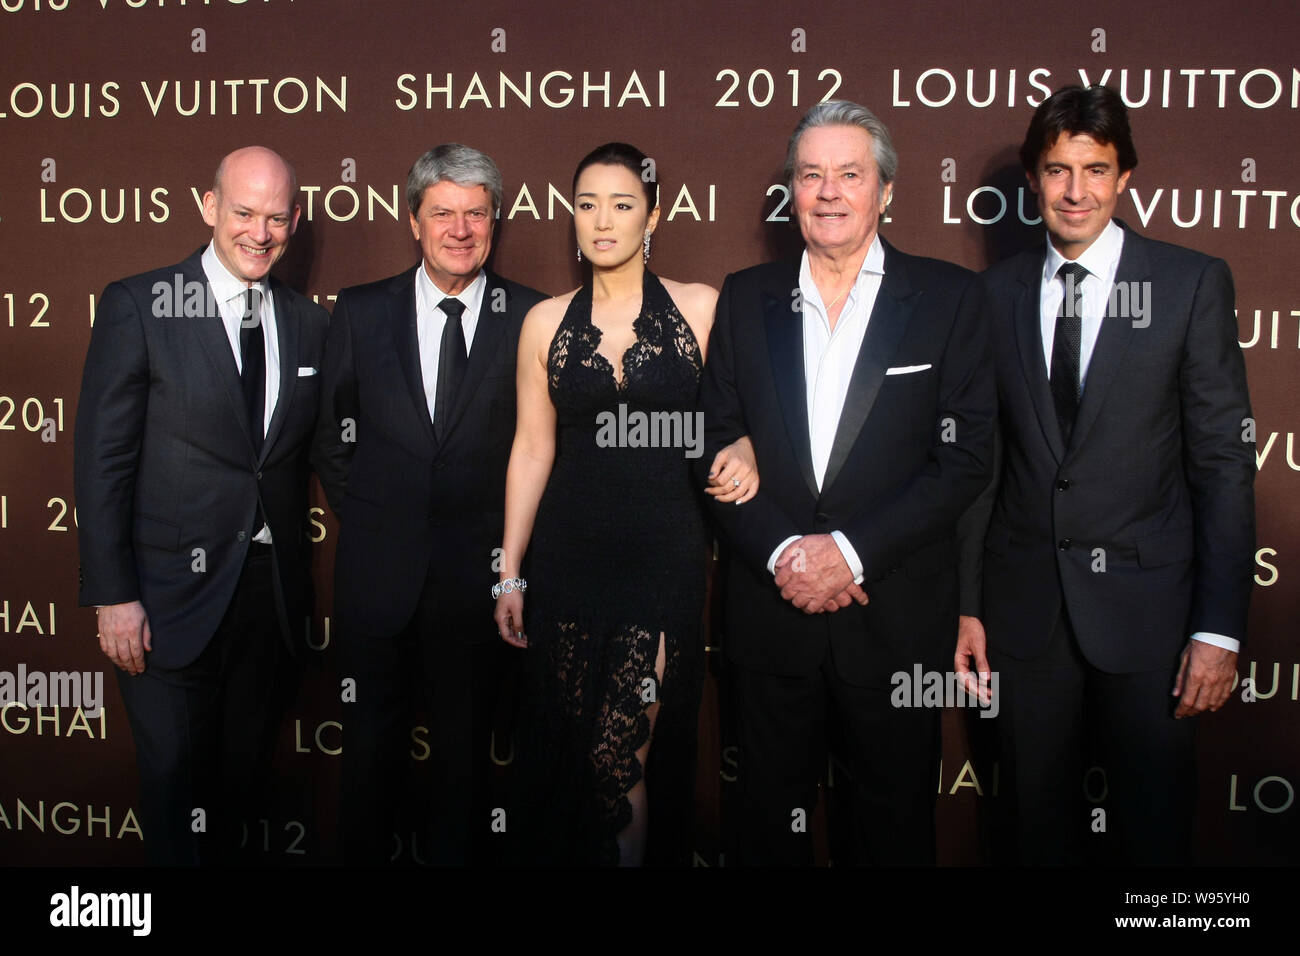 The Point of Elegance: Hennessy x Louis Vuitton Reveal in Shanghai